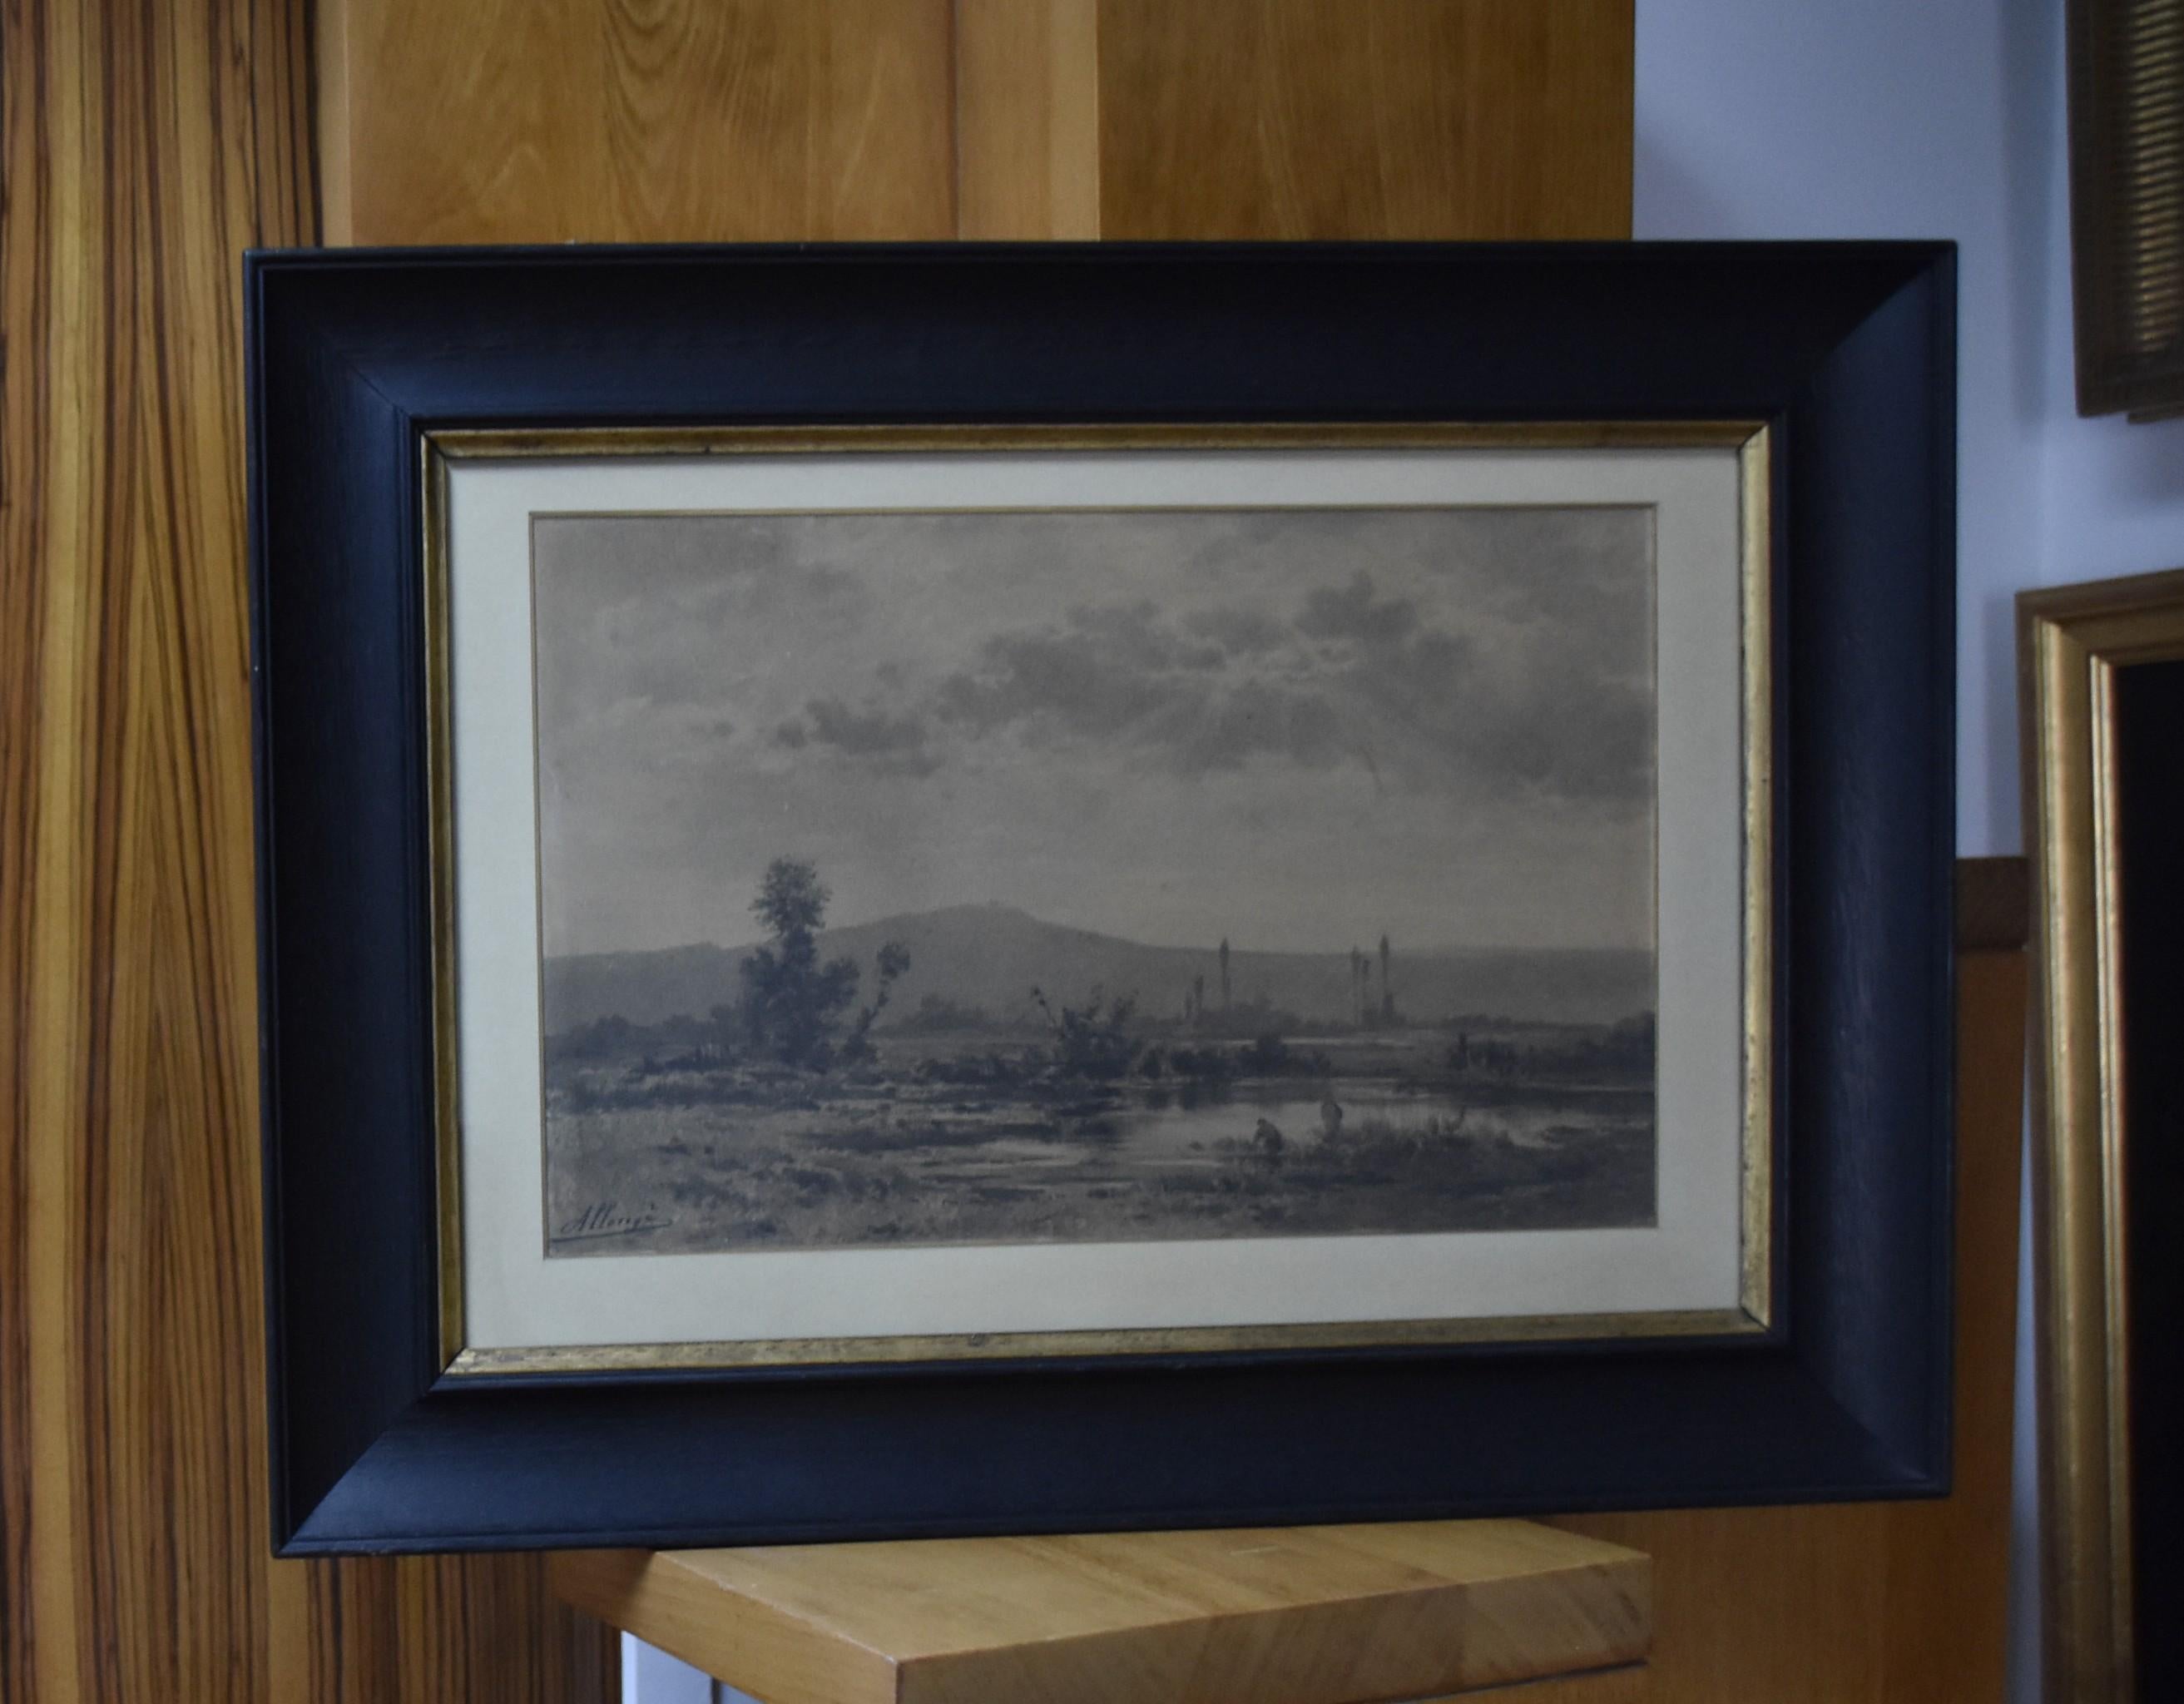 Auguste Allongé (1833-1898)
A Landscape with a pond, 
signed lower left 
charcoal on paper
26 x 40.5 cm
In good condition
In a modern frame : 45 x 60.5 cm

This is a beautiful charcoal work very characteristic of the landscape art of Auguste